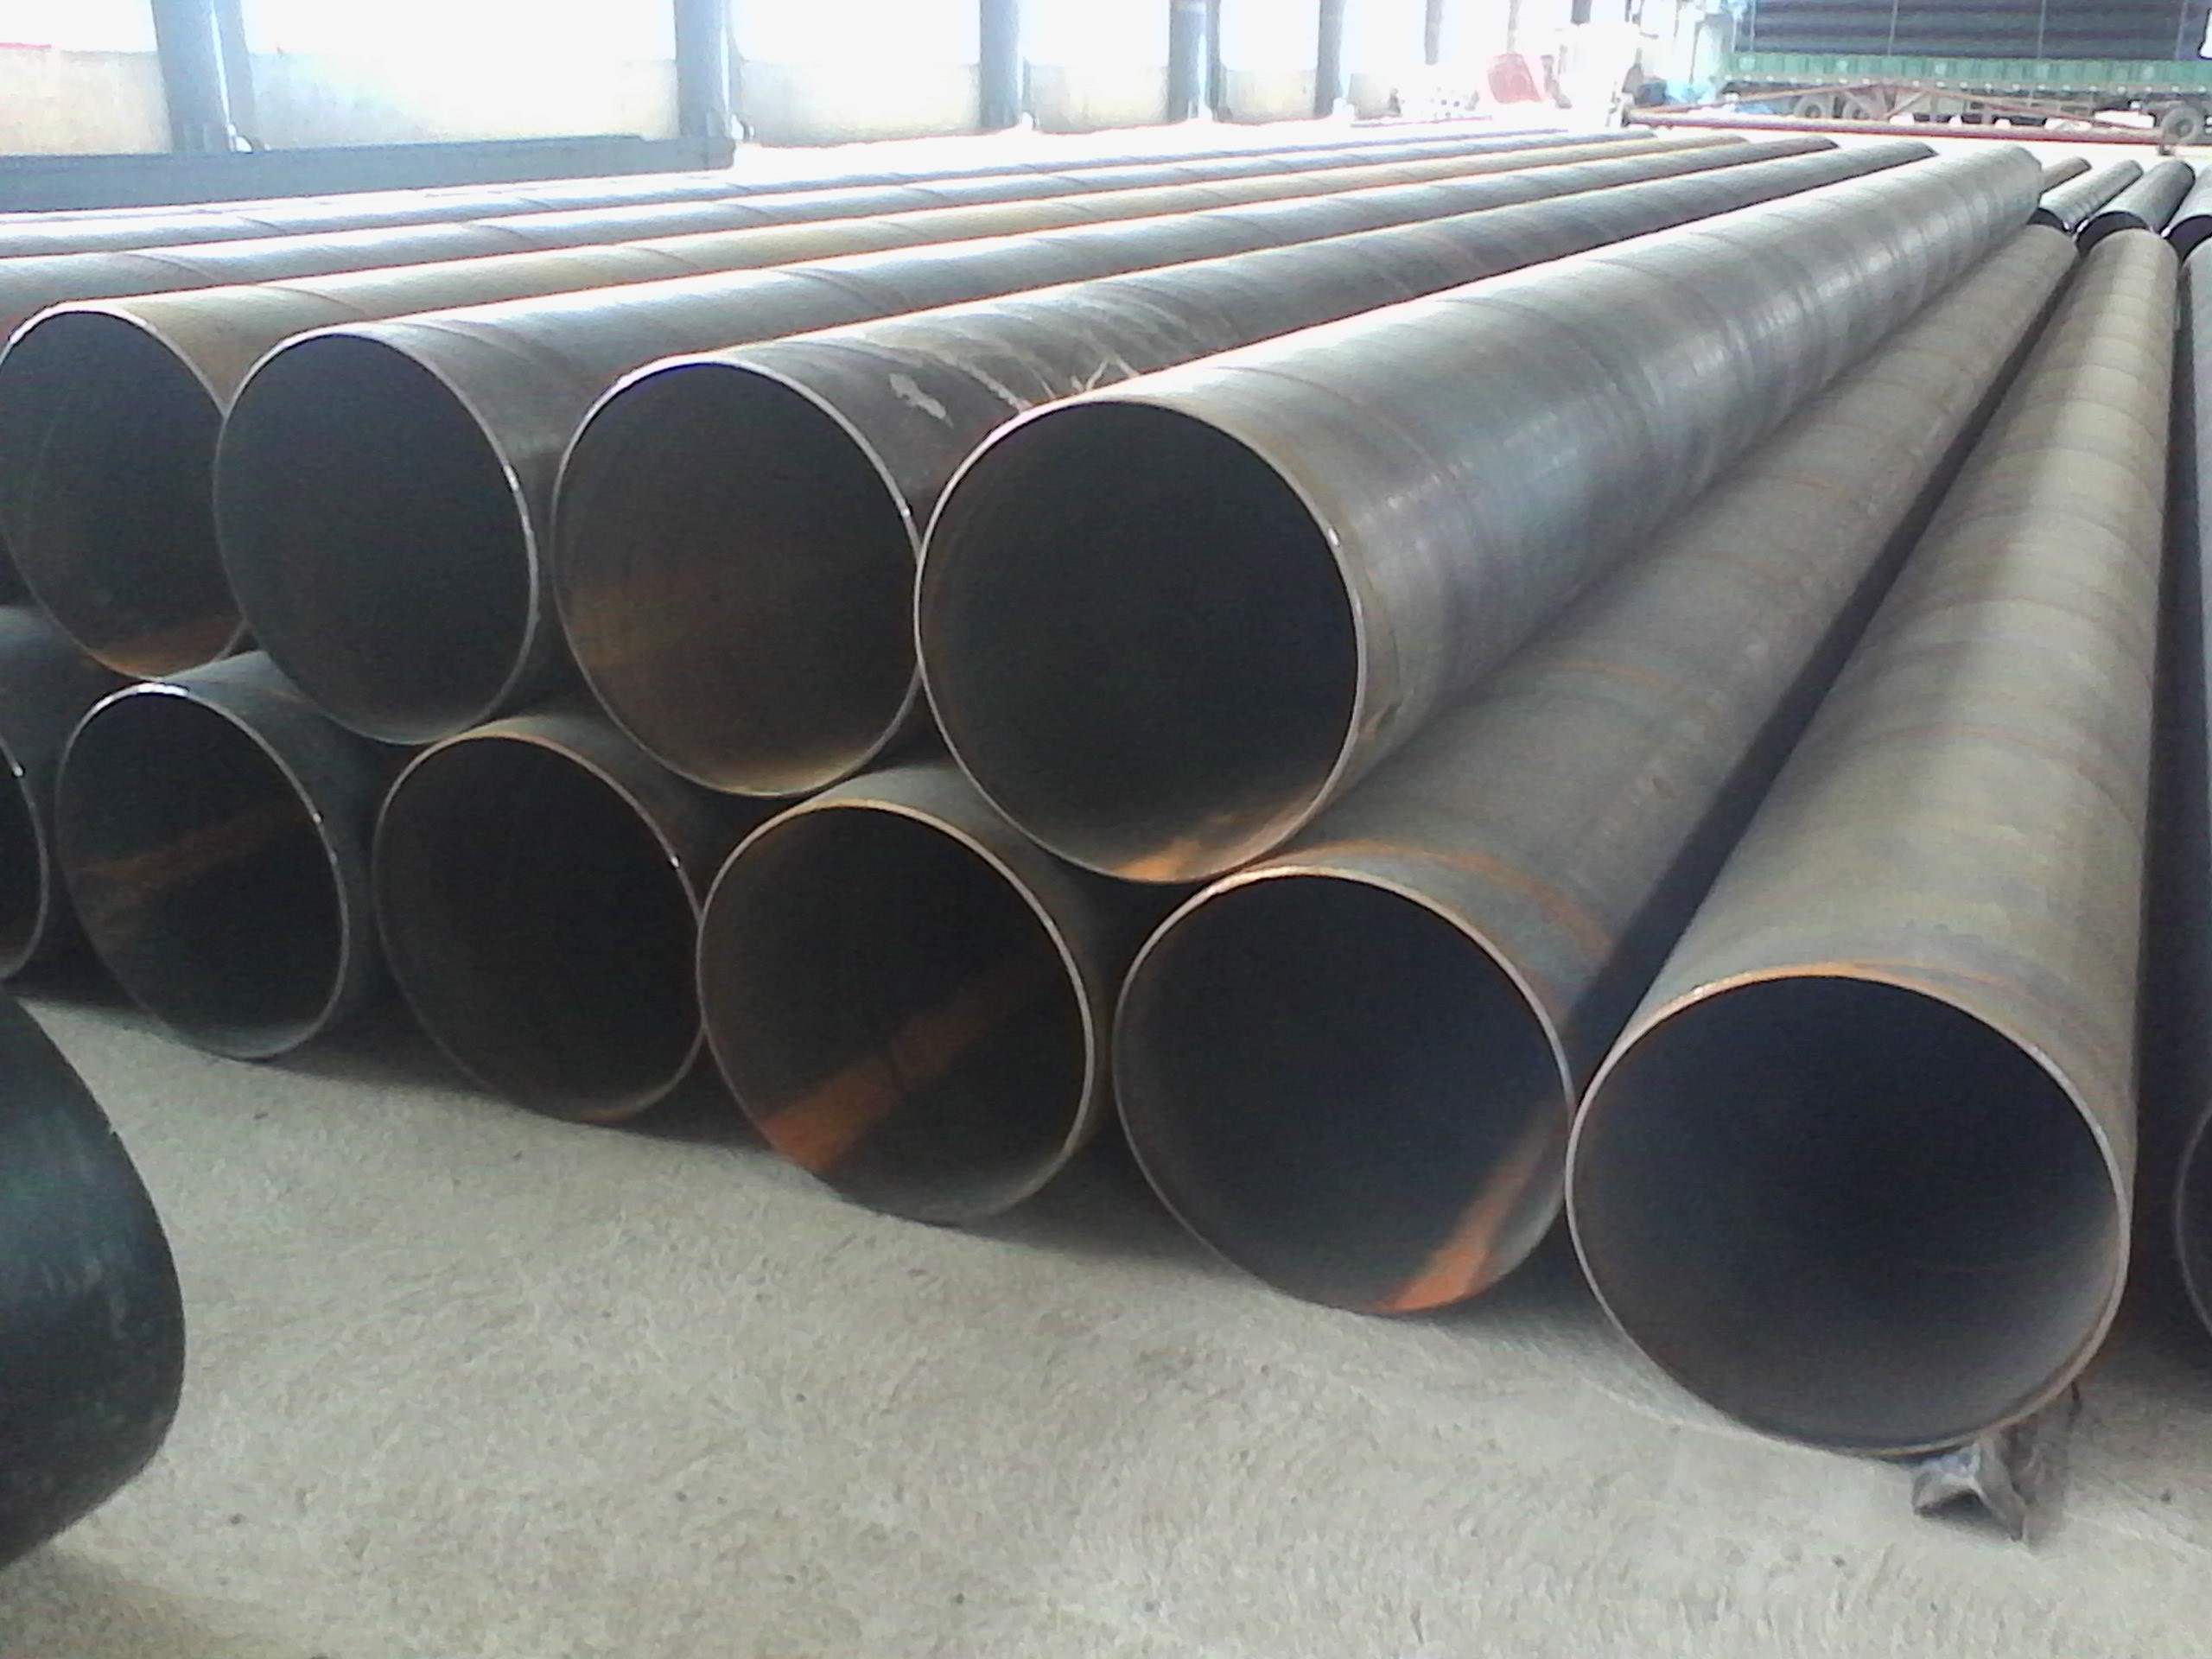 Identification of fake spiral steel pipe